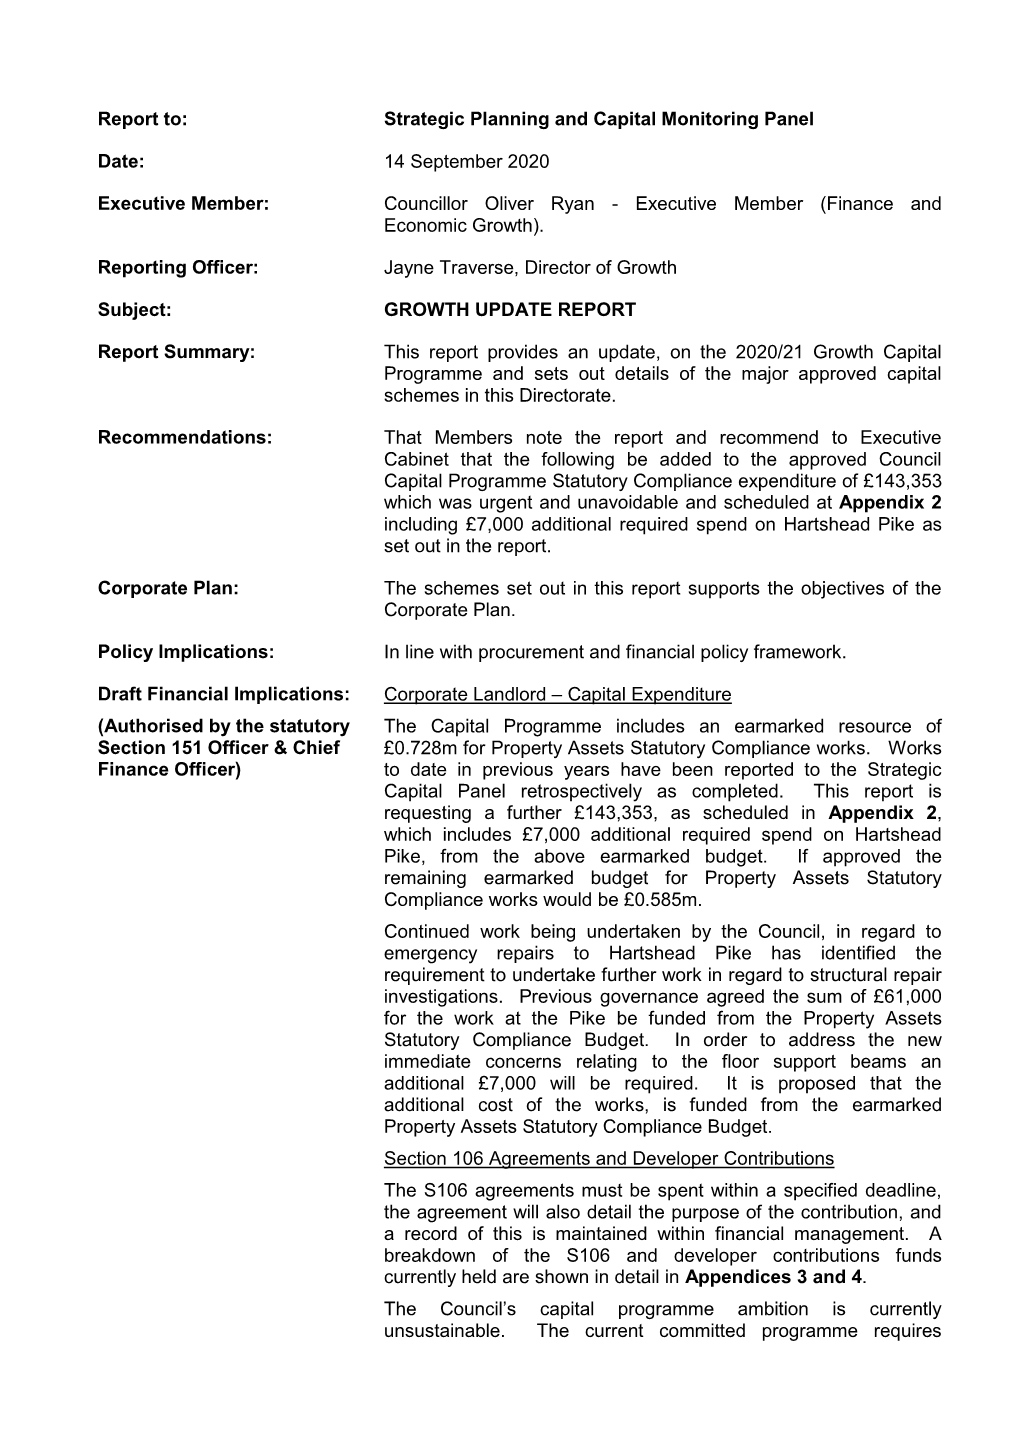 Report To: Strategic Planning and Capital Monitoring Panel Date: 14 September 2020 Executive Member: Councillor Oliver Ryan